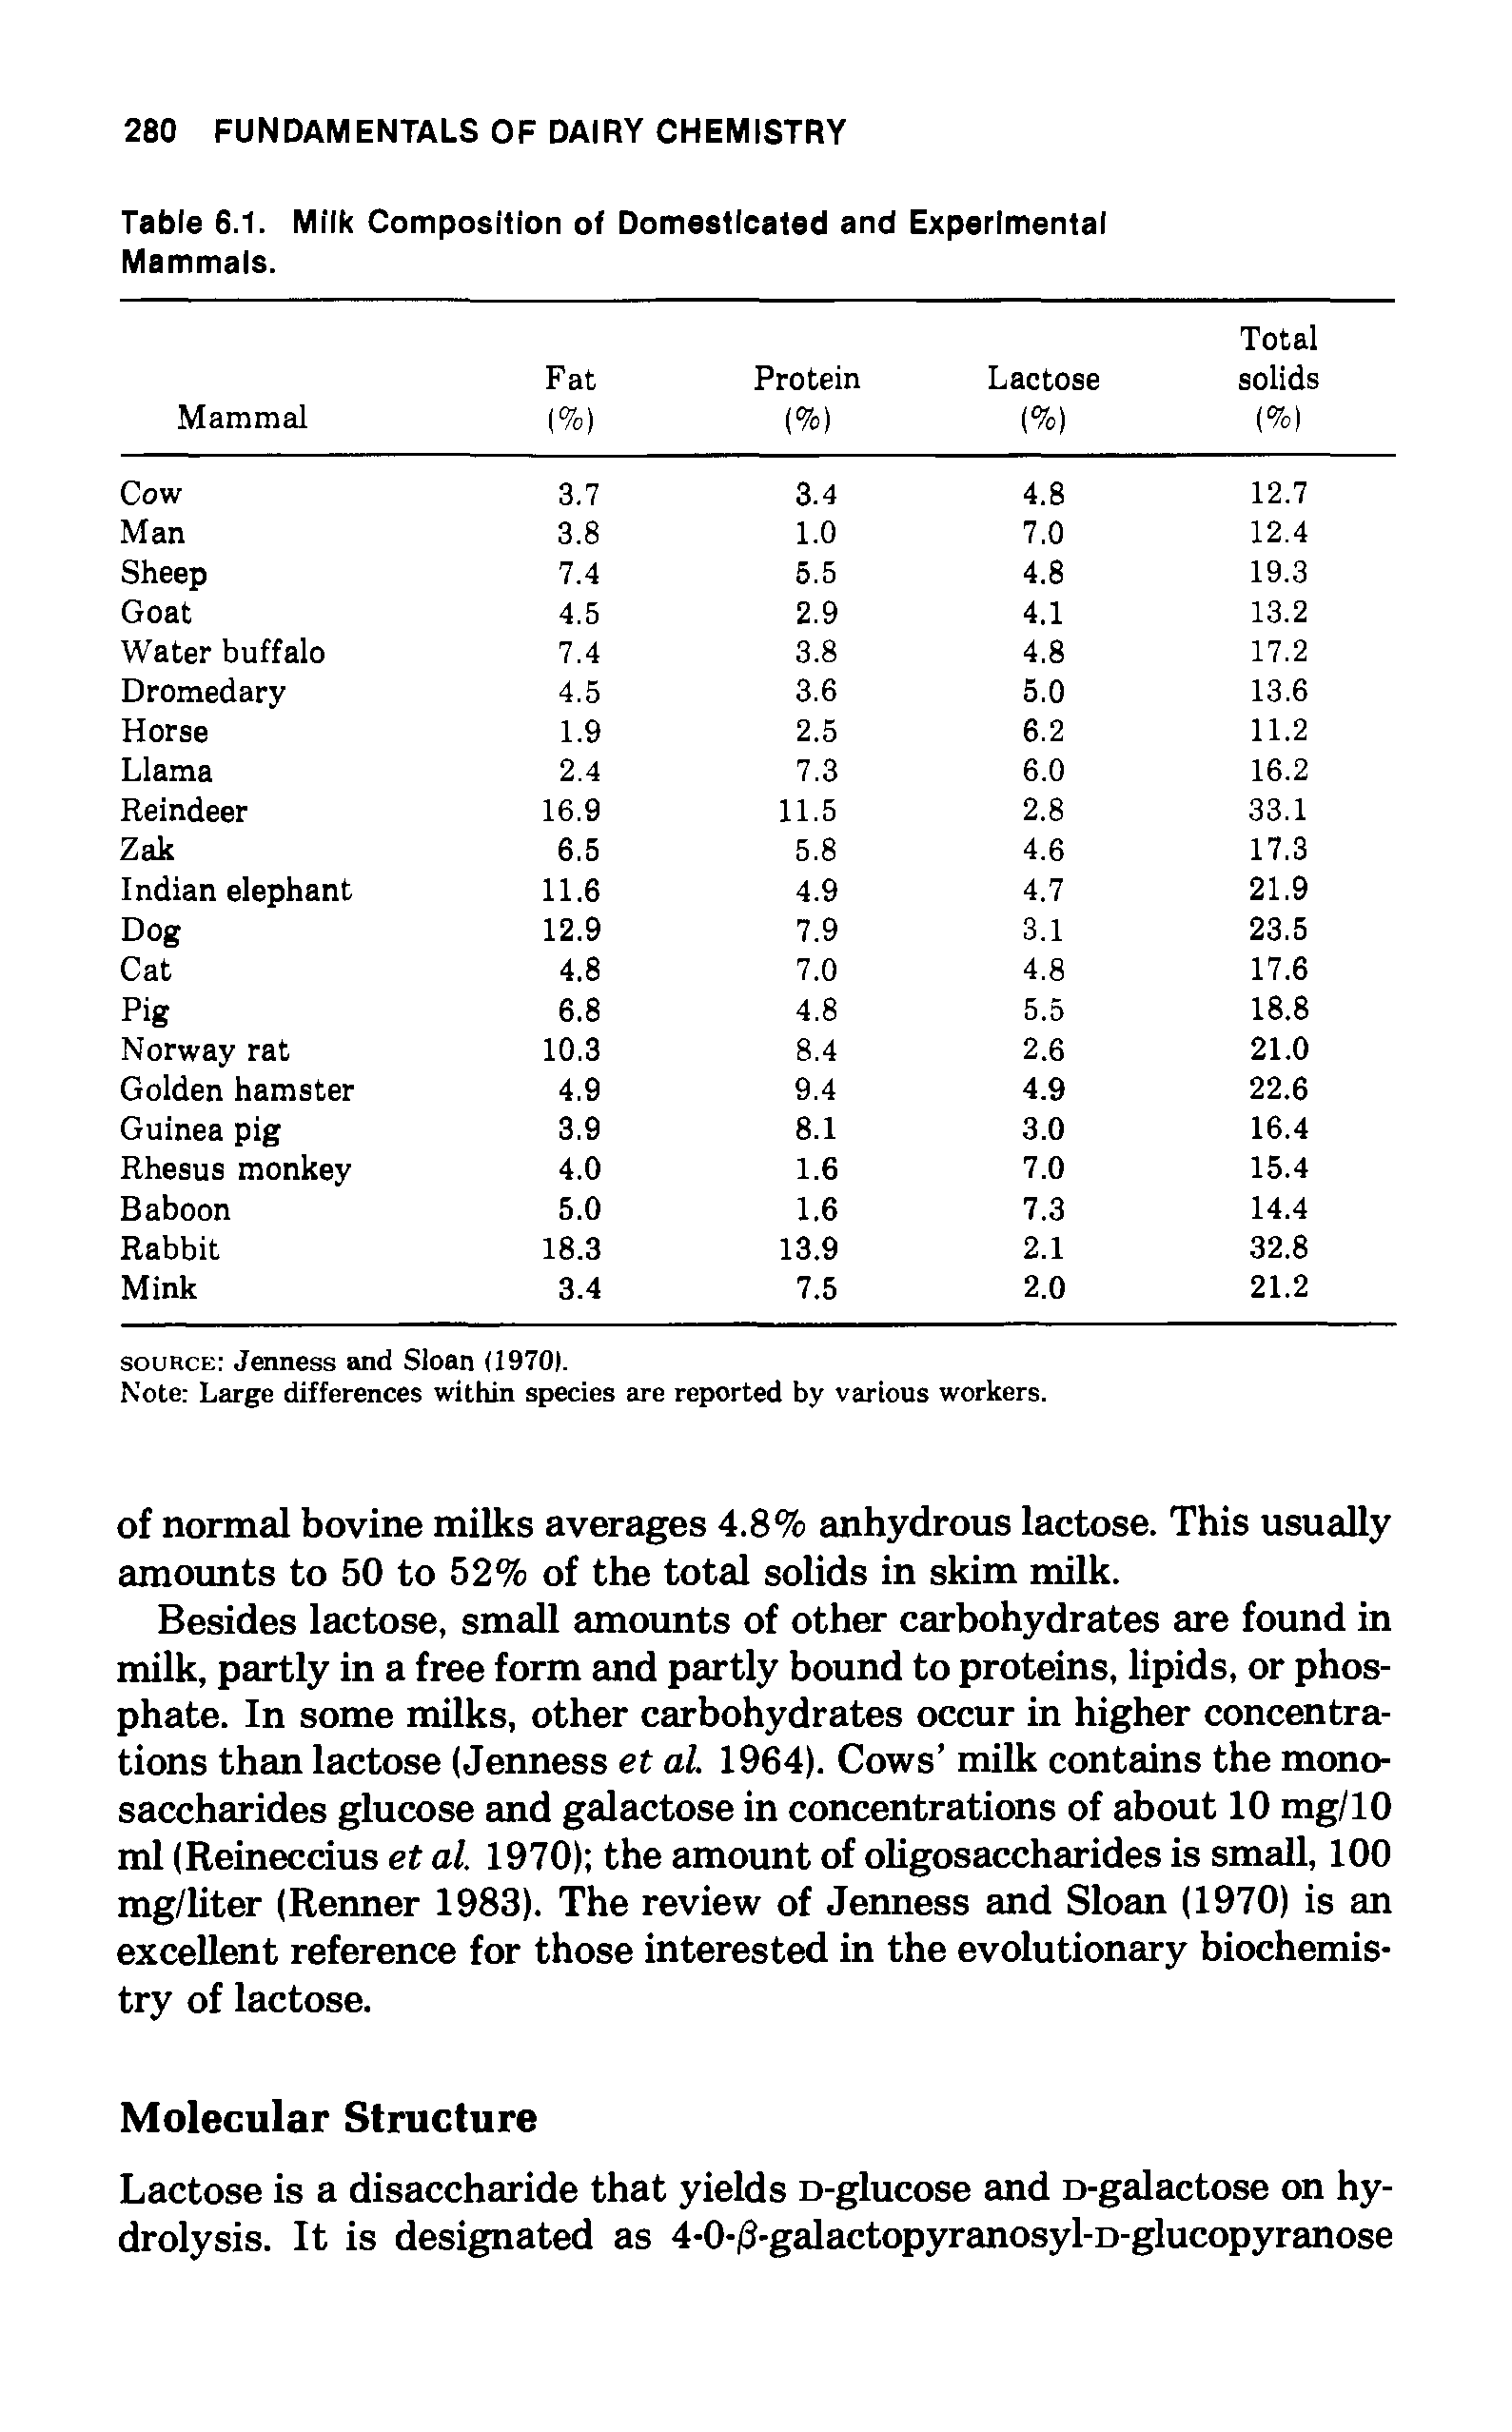 Table 6.1. Milk Composition of Domesticated and Experimental Mammals.